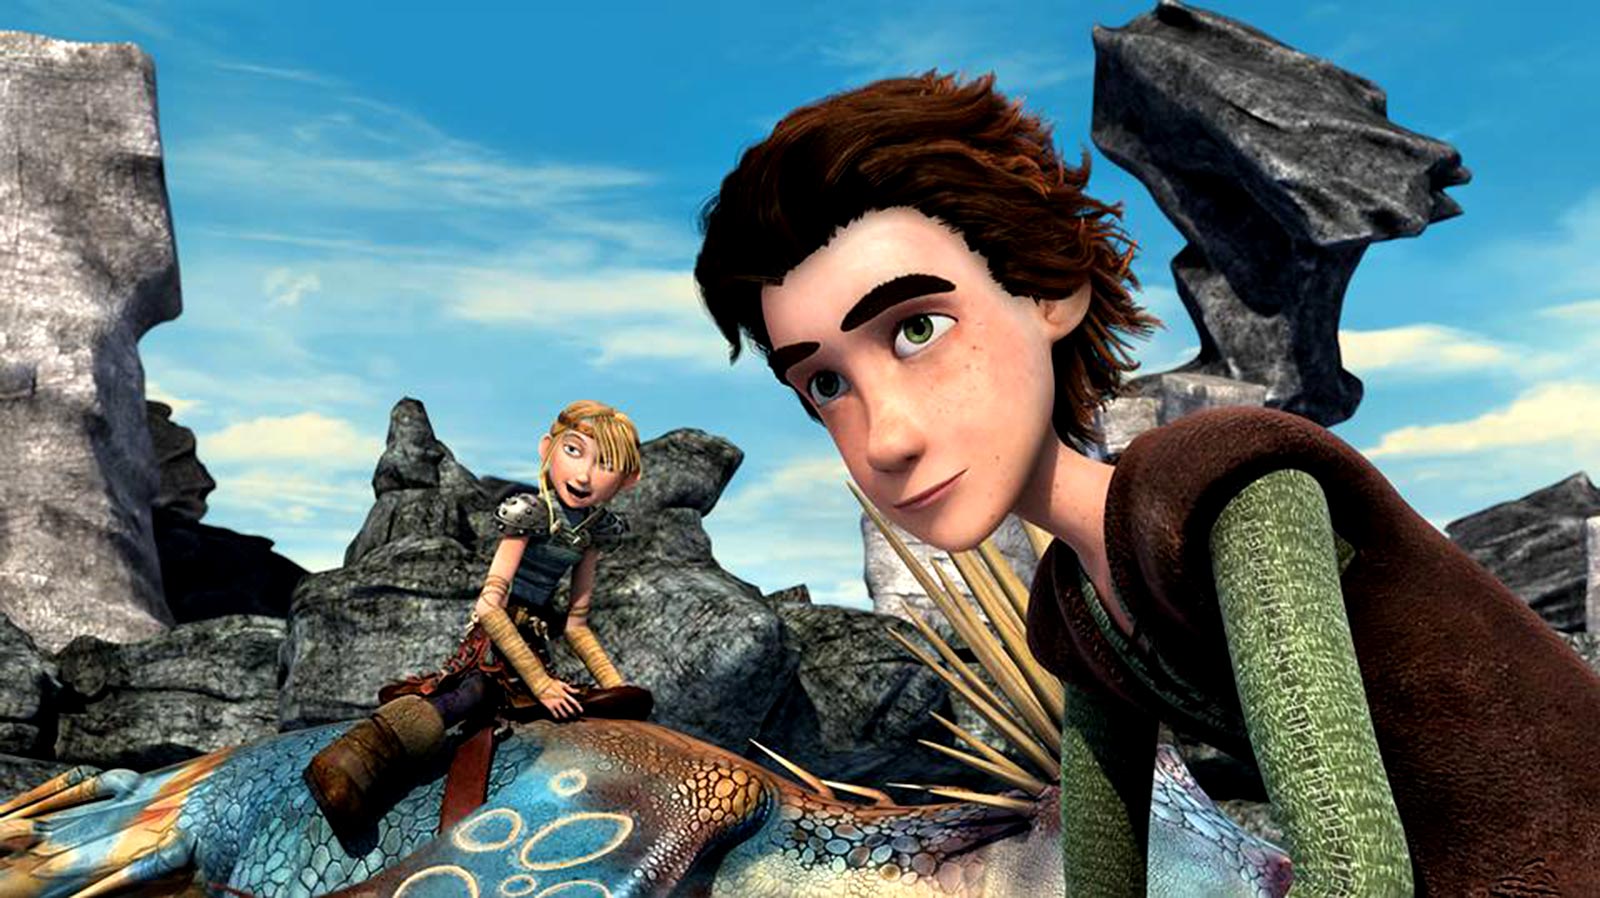 How to Train Your Dragon 2 Picture, Wallpaper and Desktop